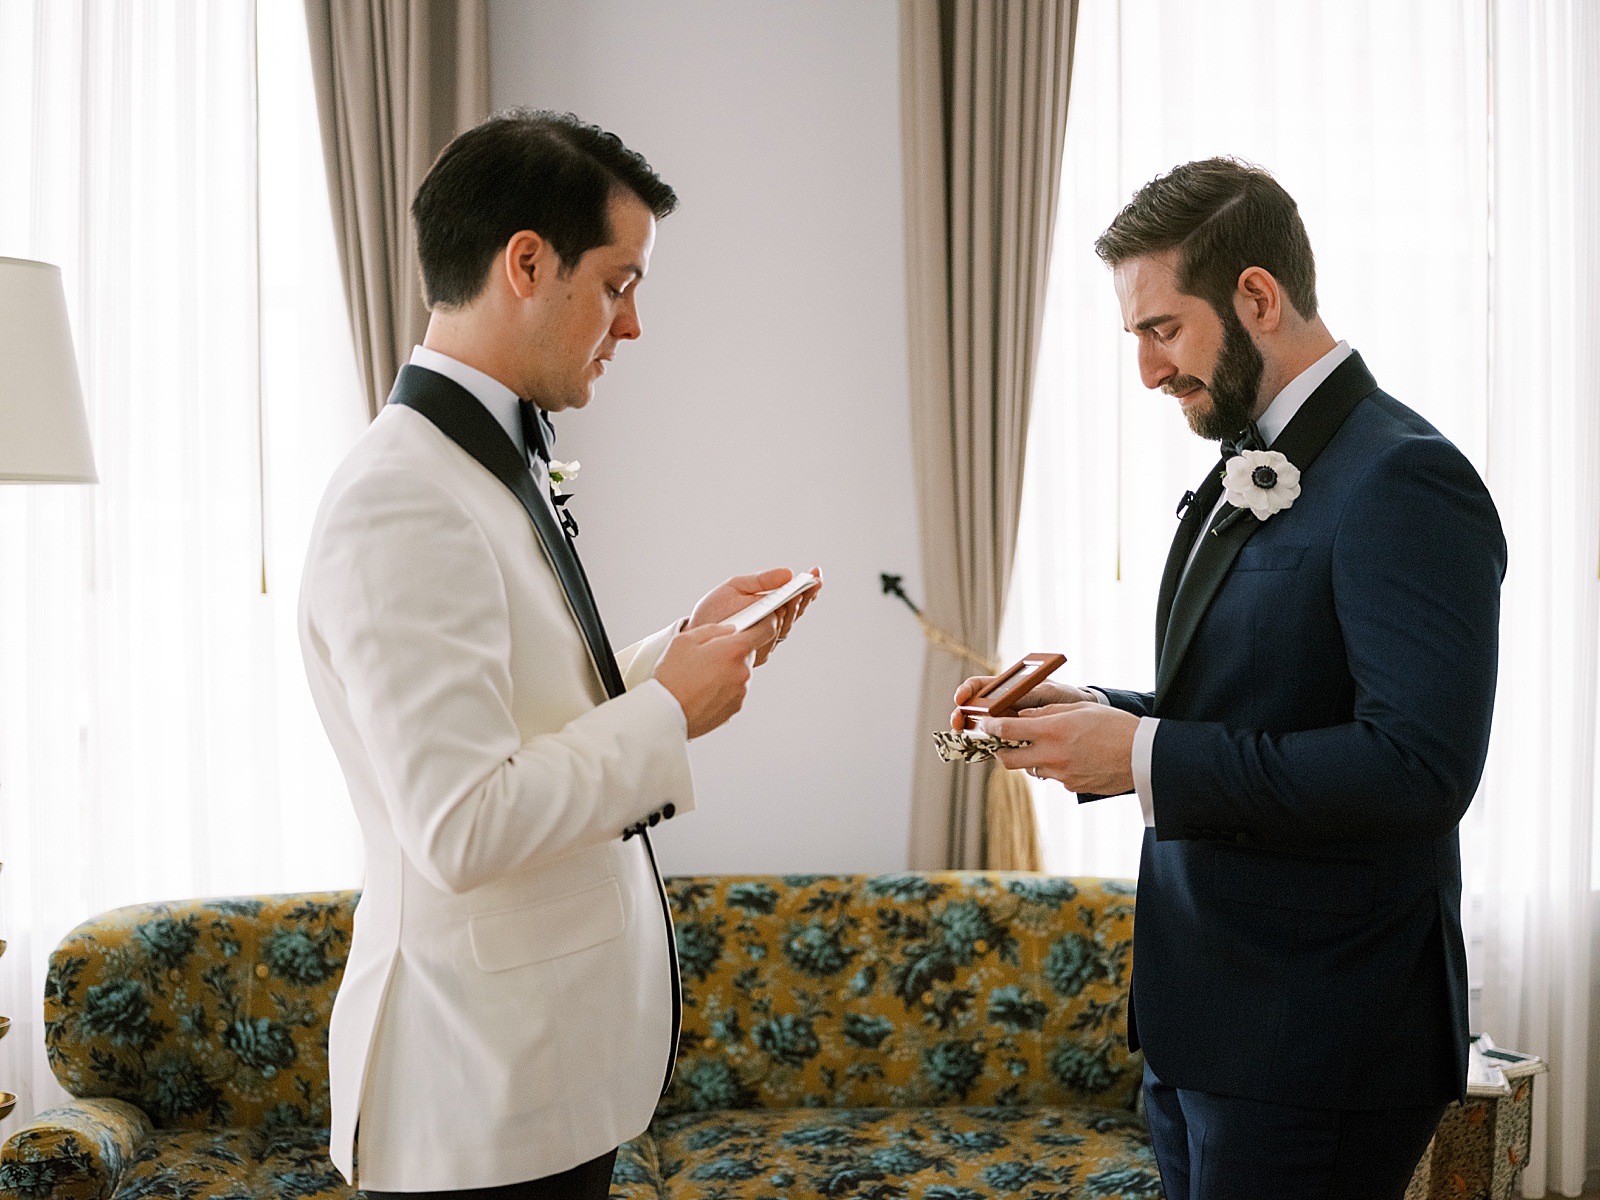 Two grooms exchange wedding day gifts in a hotel suite.